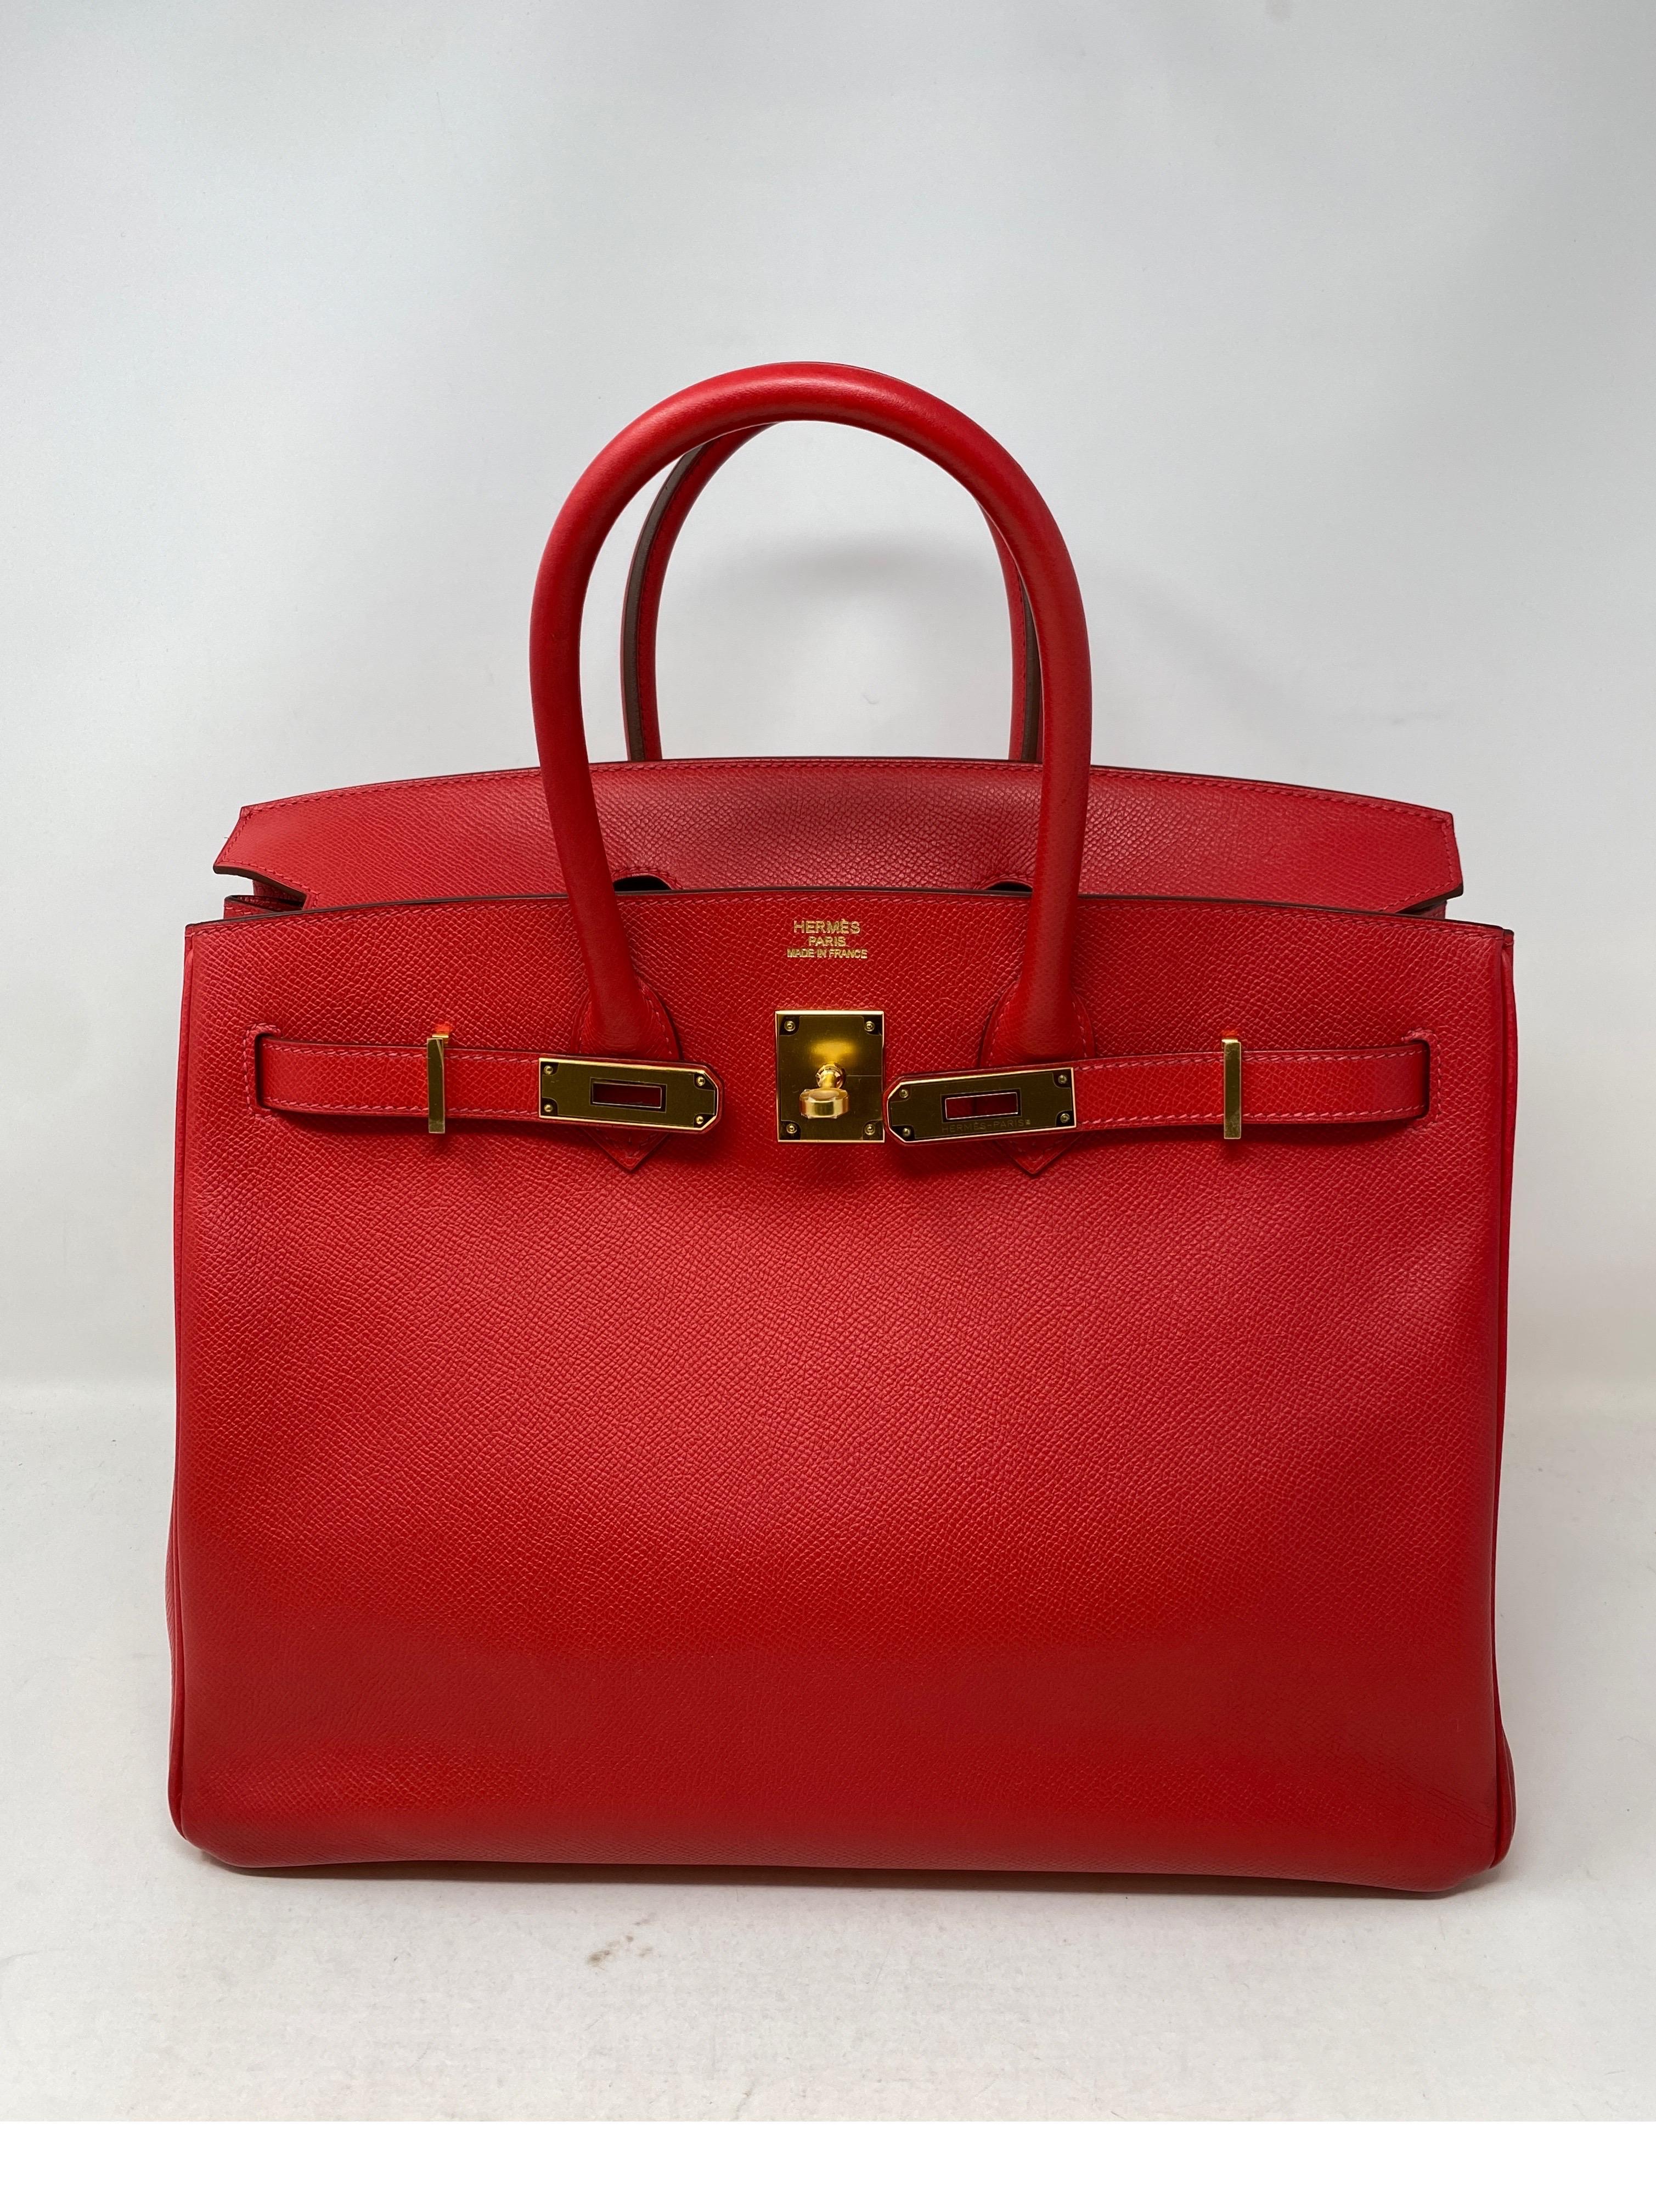 Hermes Rouge Casaque Birkin 35 Bag. Most wanted red color with gold hardware. Epsom leather. Excellent condition. Looks like new condition. Plastic still on hardware. Includes clochette, lock, keys, and dust cover. Guaranteed authentic.